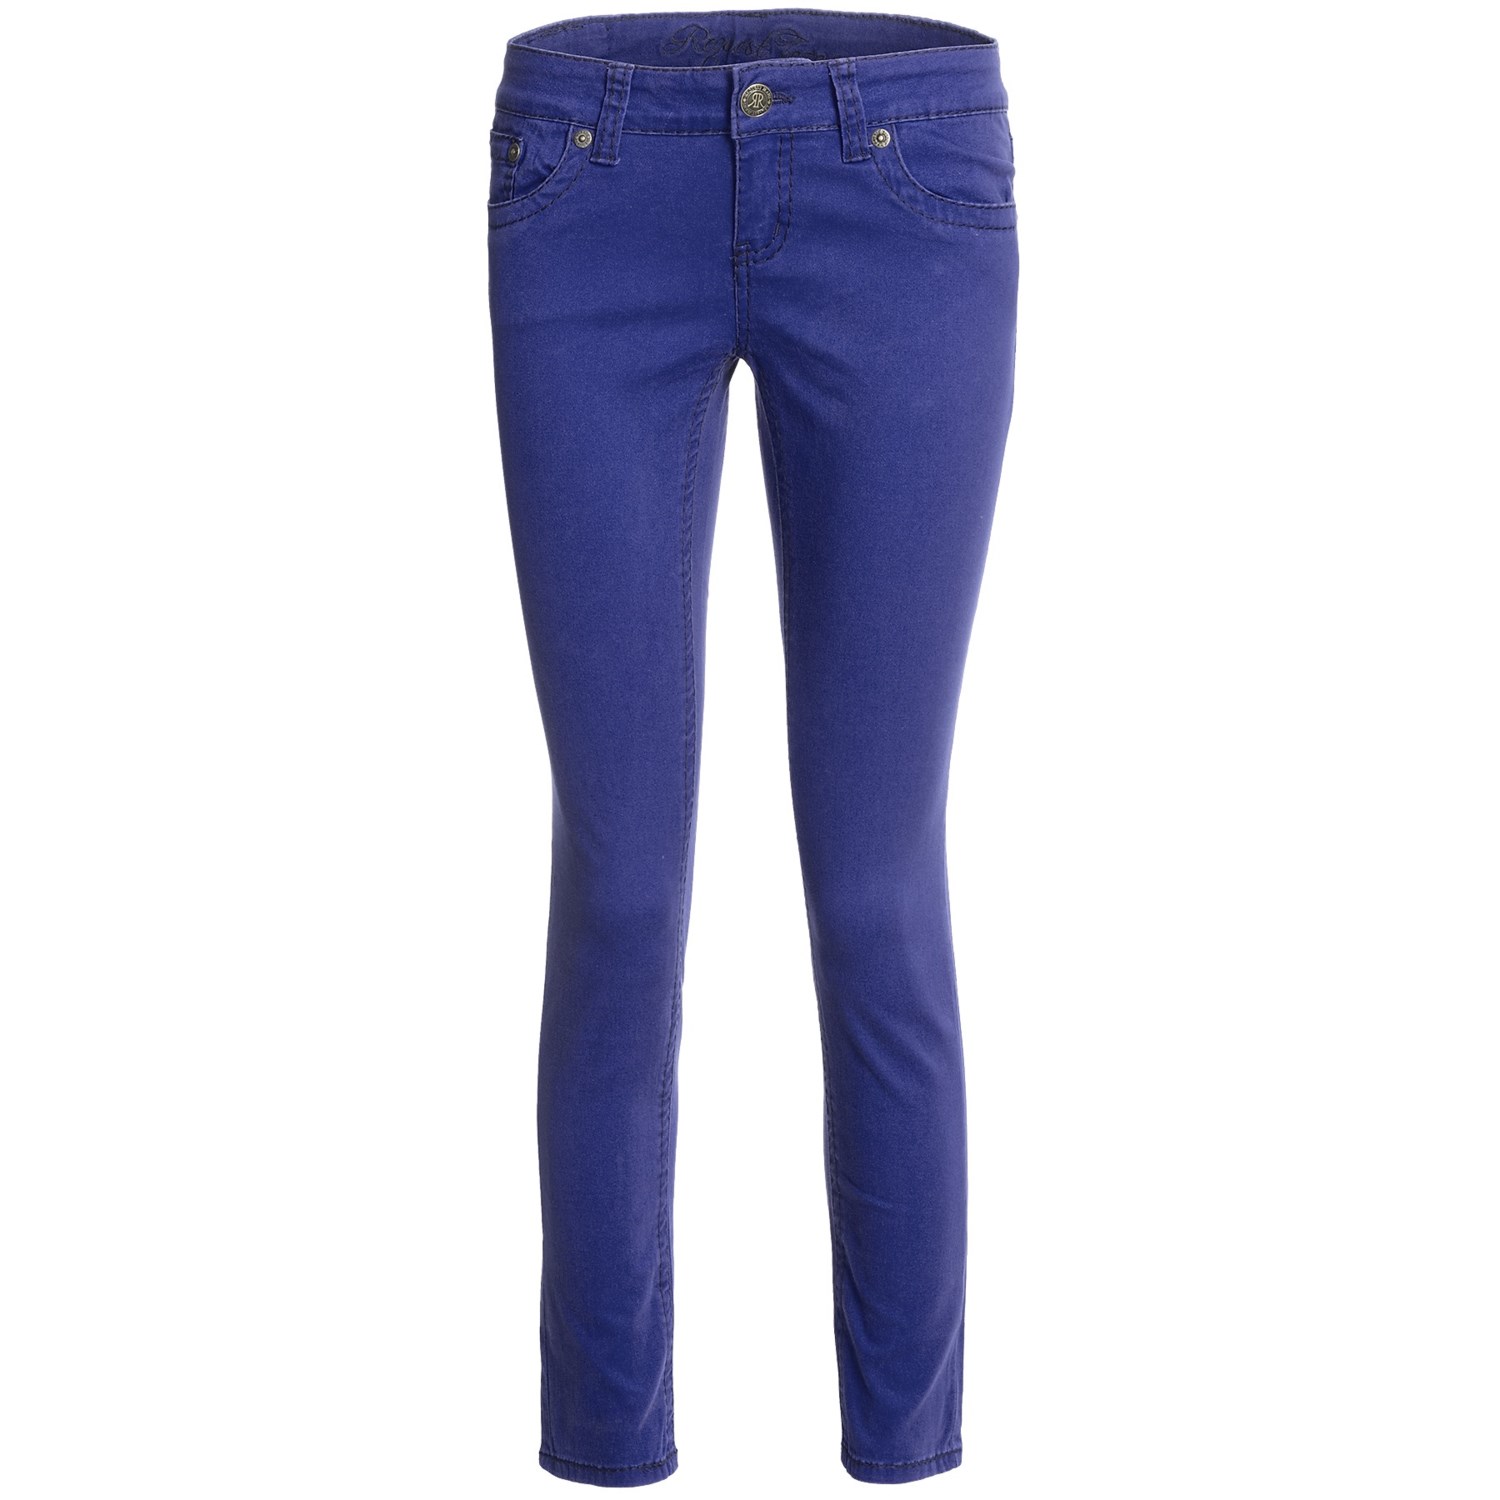 Request Jeans Cigarette Skinny Jeans - Stretch Twill, Low Rise (For ...